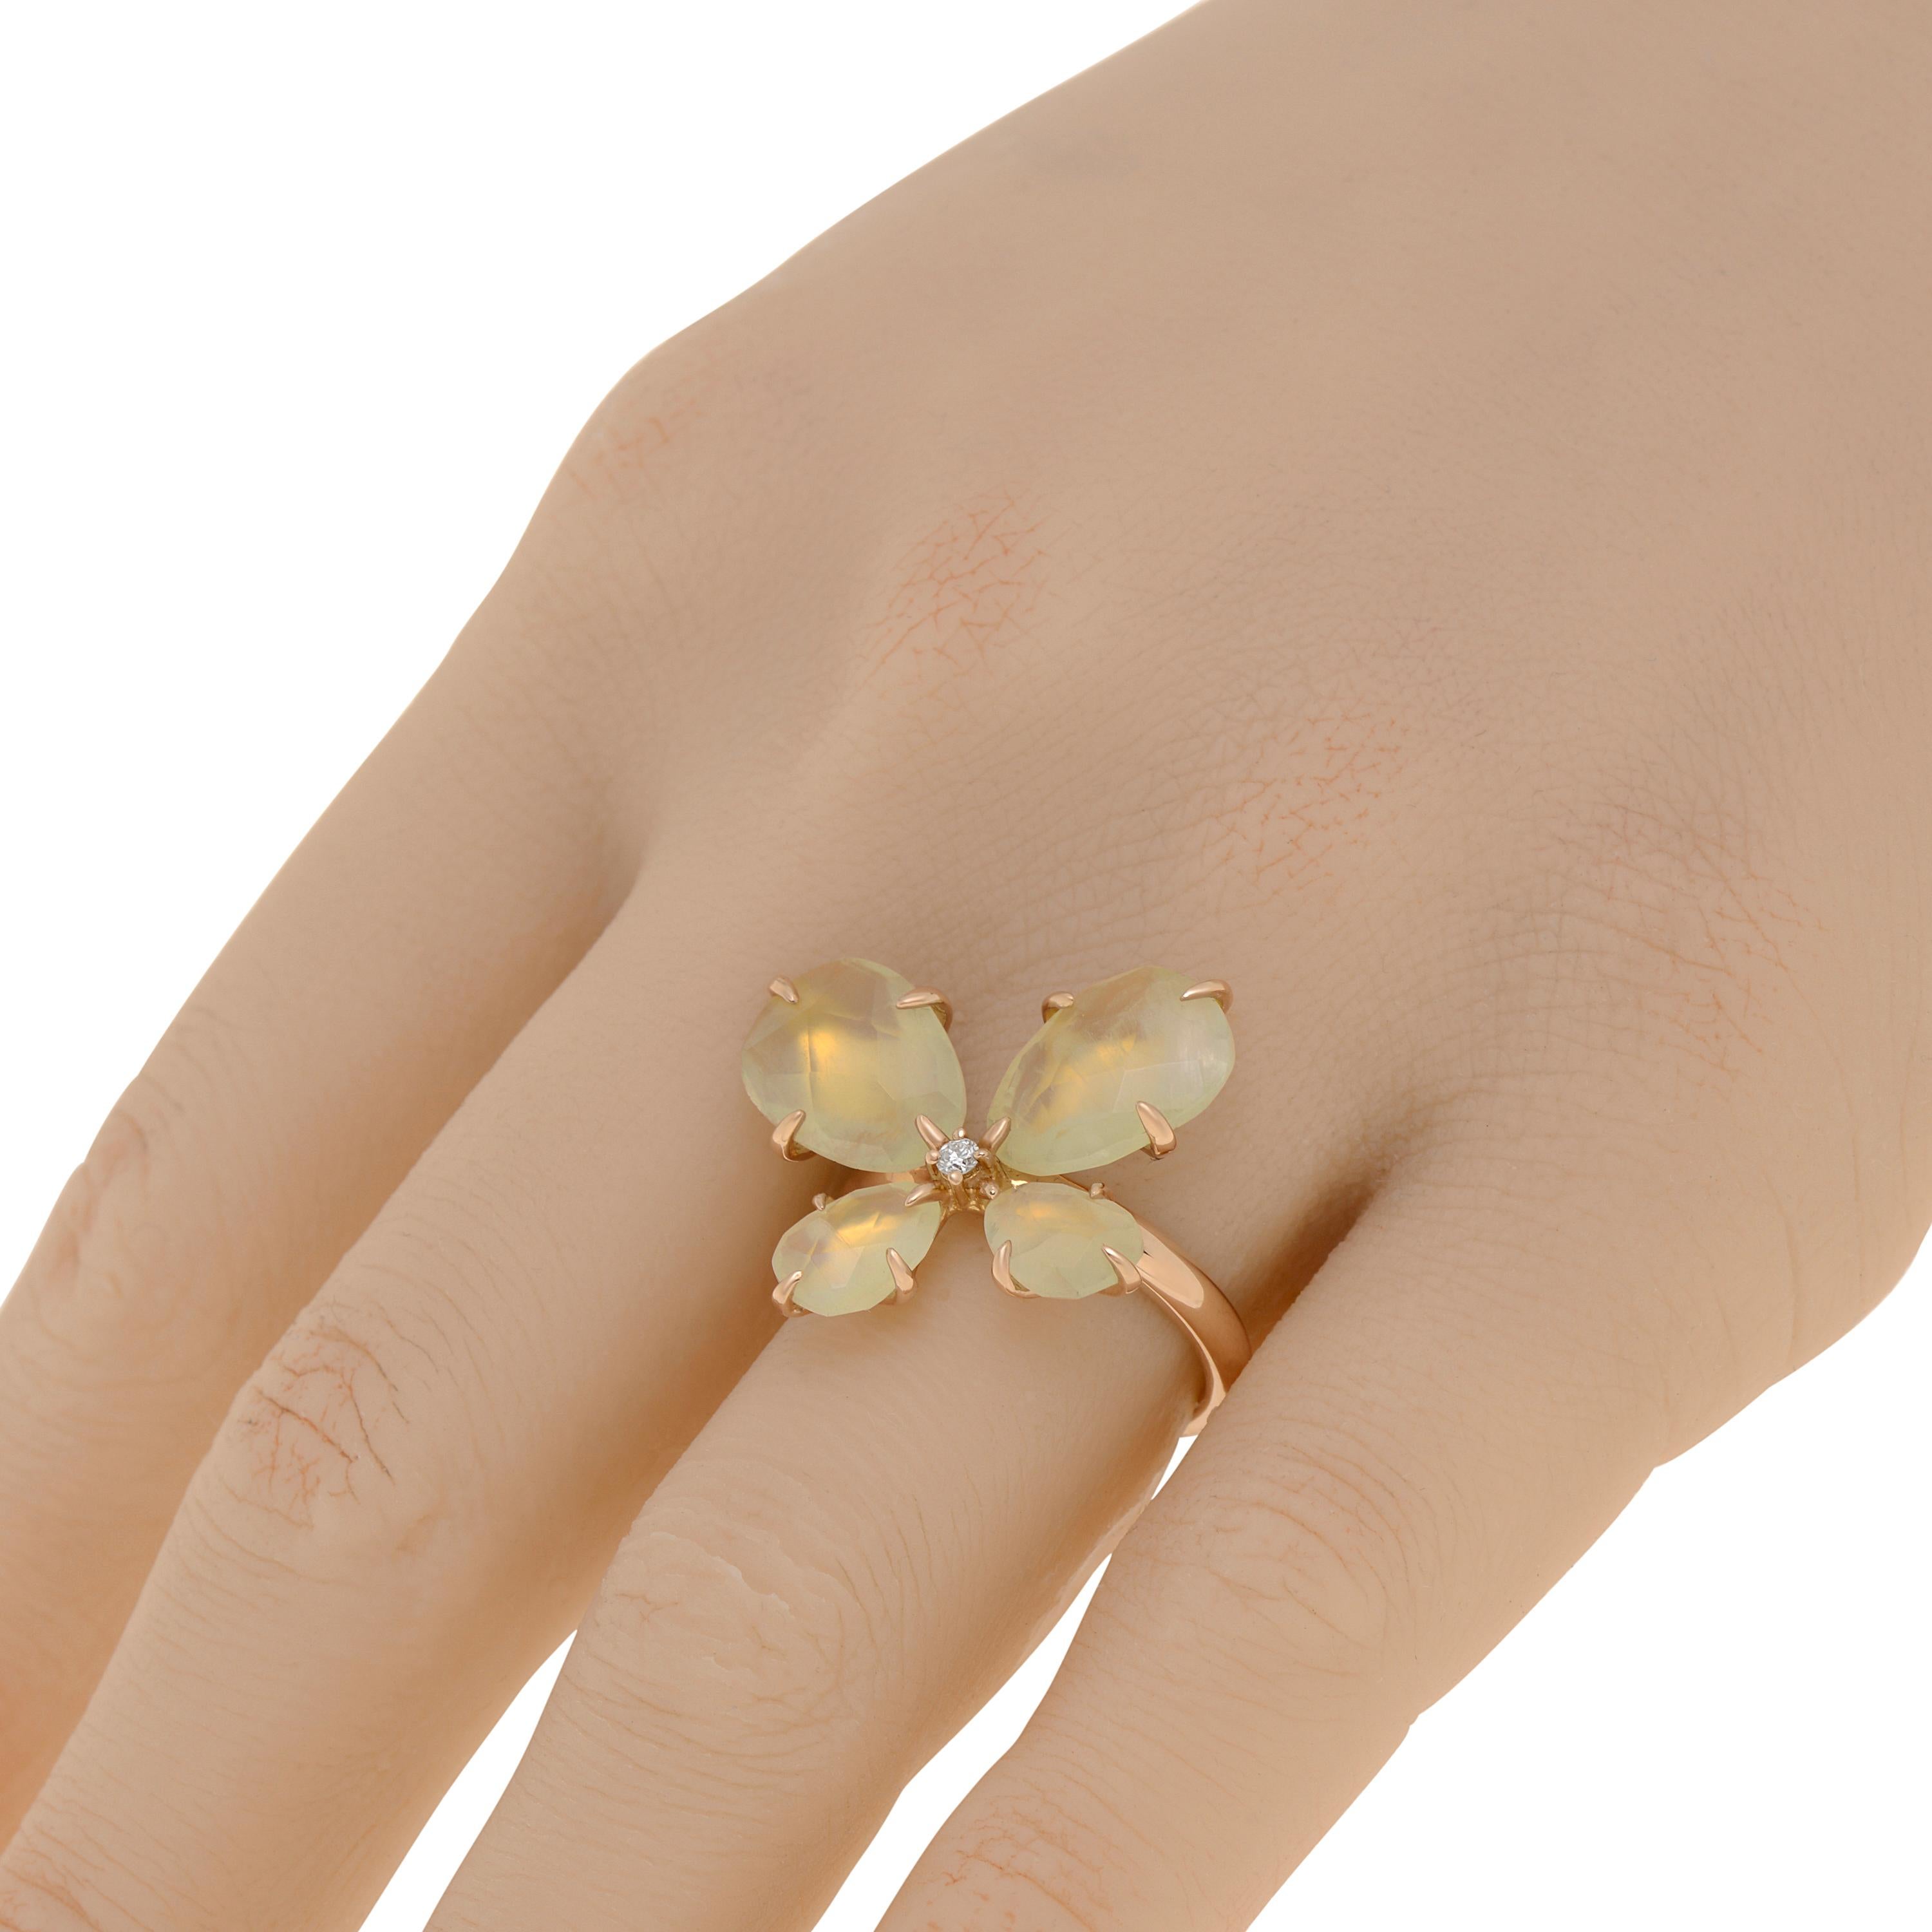 Mimi Milano 18K rose gold statement ring features an adorable butterfly design with 0.04ct. tw. diamonds and prehnite stones. The ring size is 6.75 (54). The decoration size is 7/8